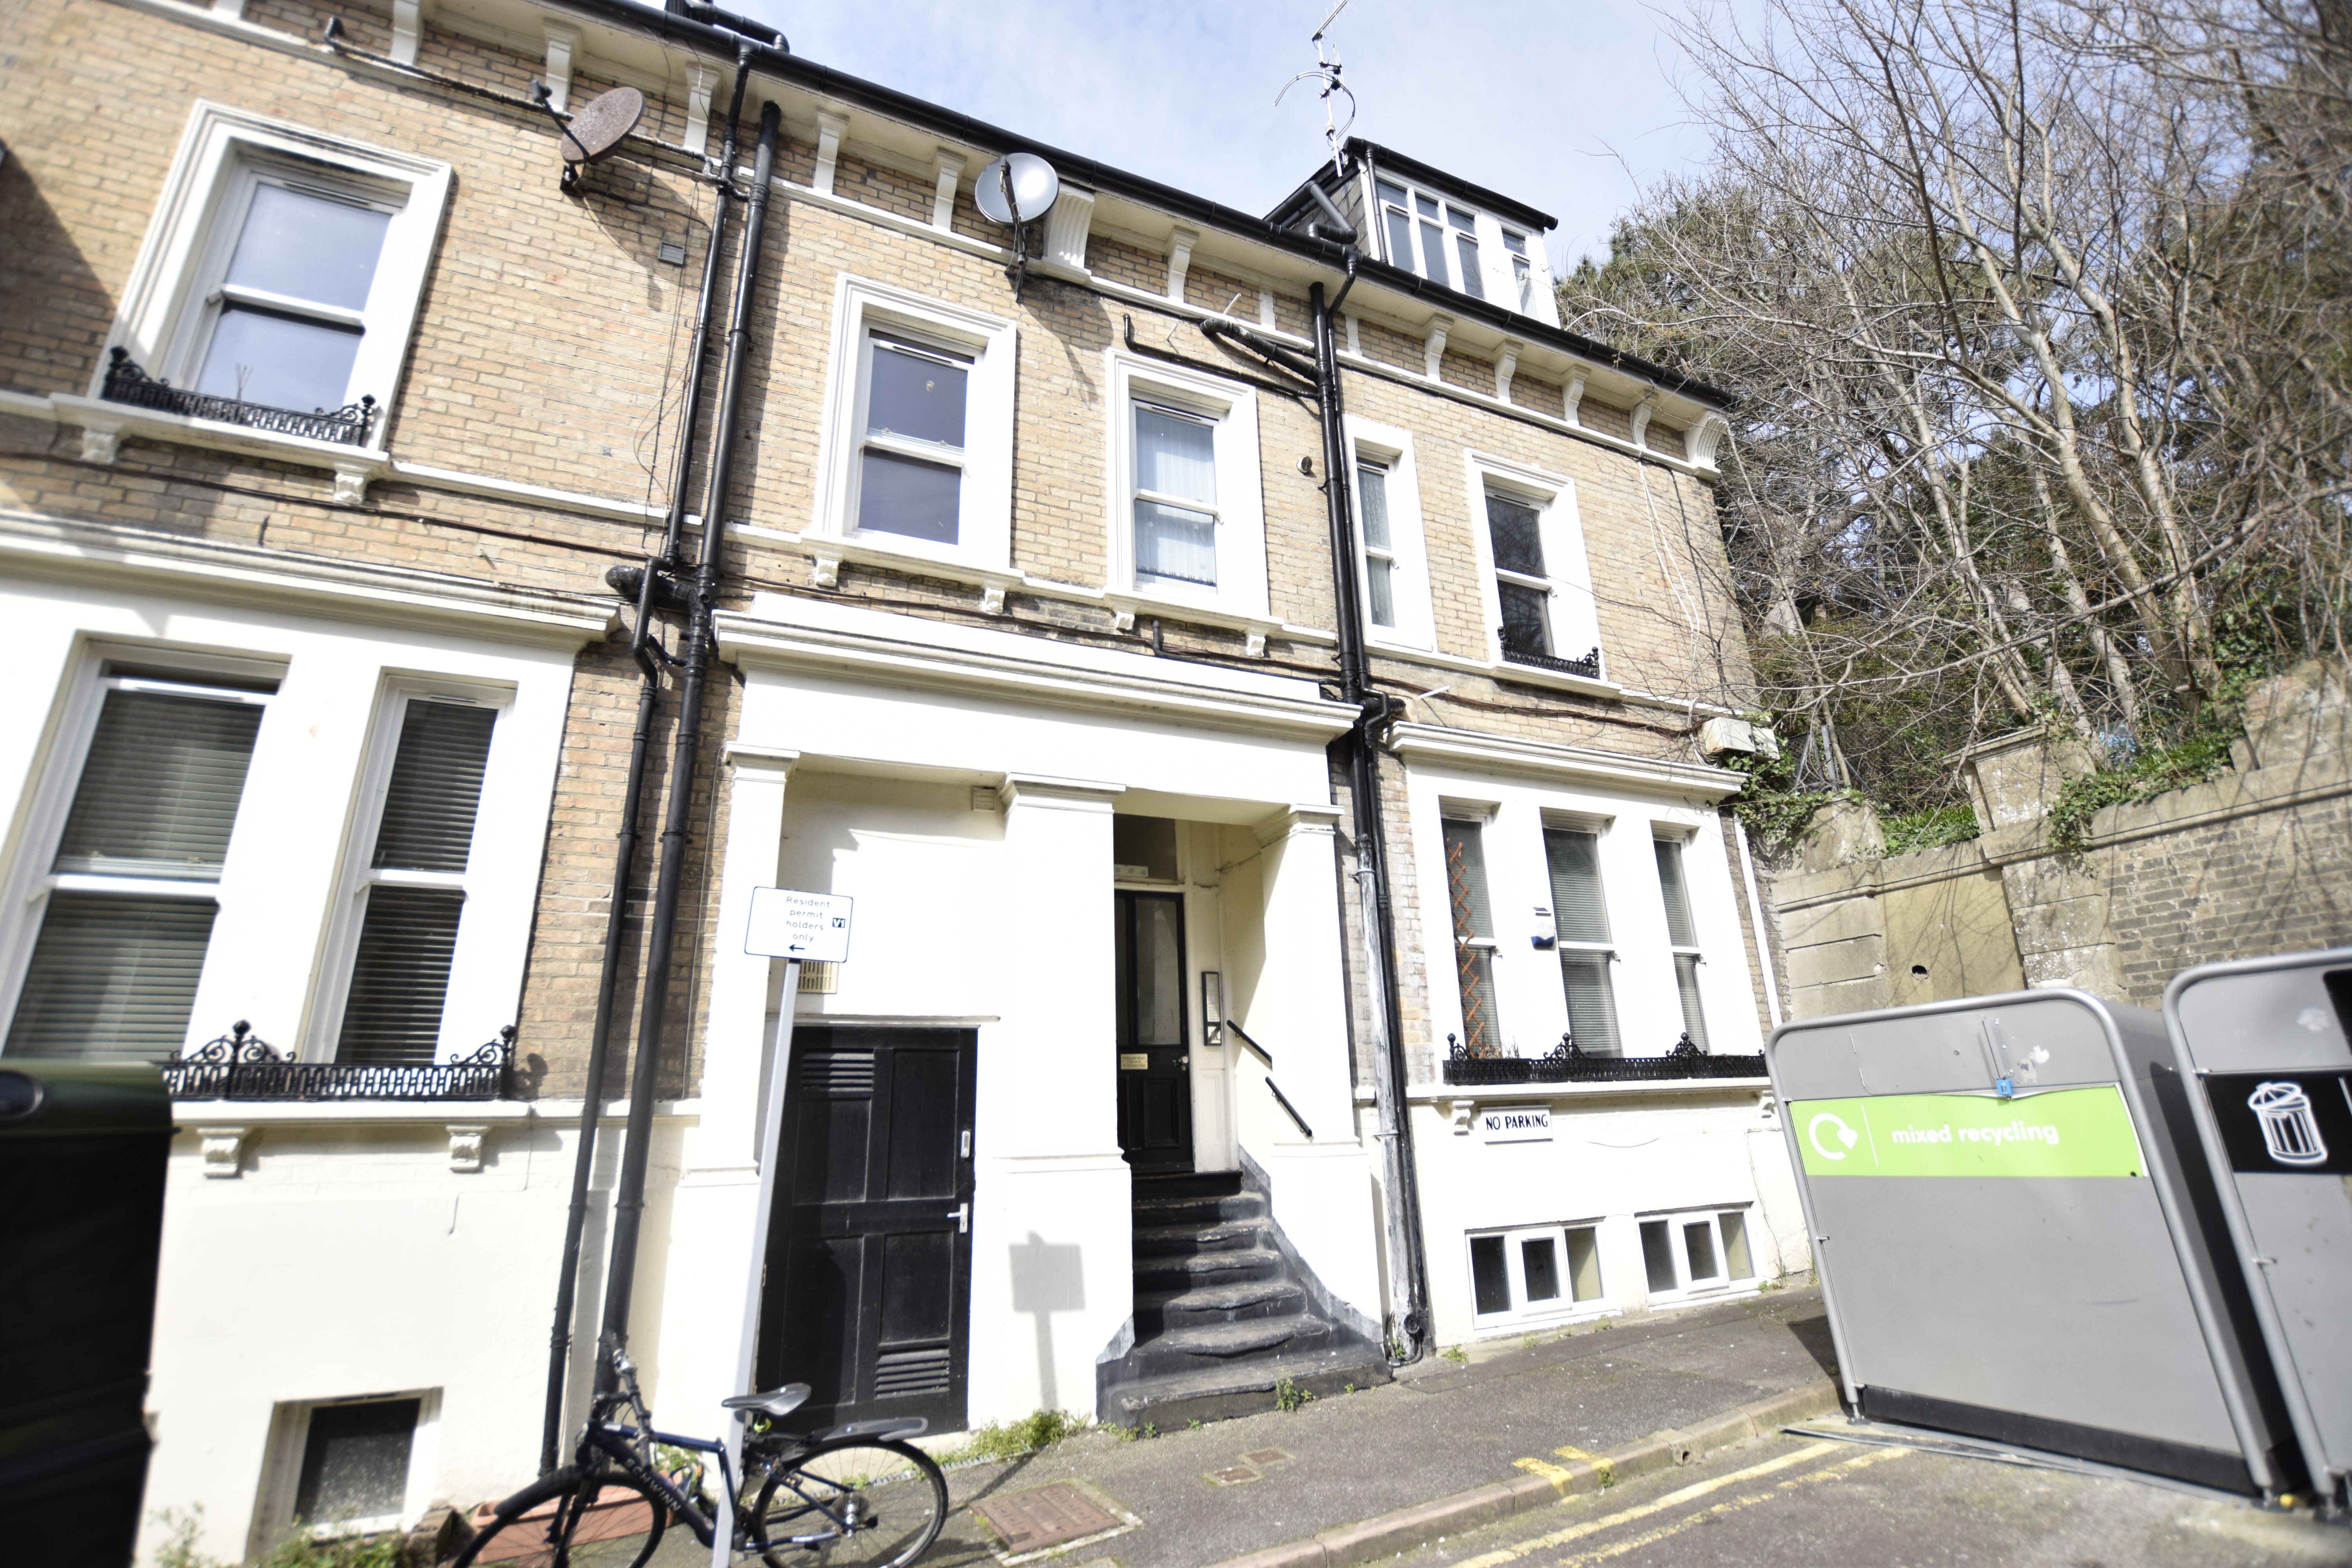 1 bed flat for sale in 11-12 Verulam Place - Property Image 1